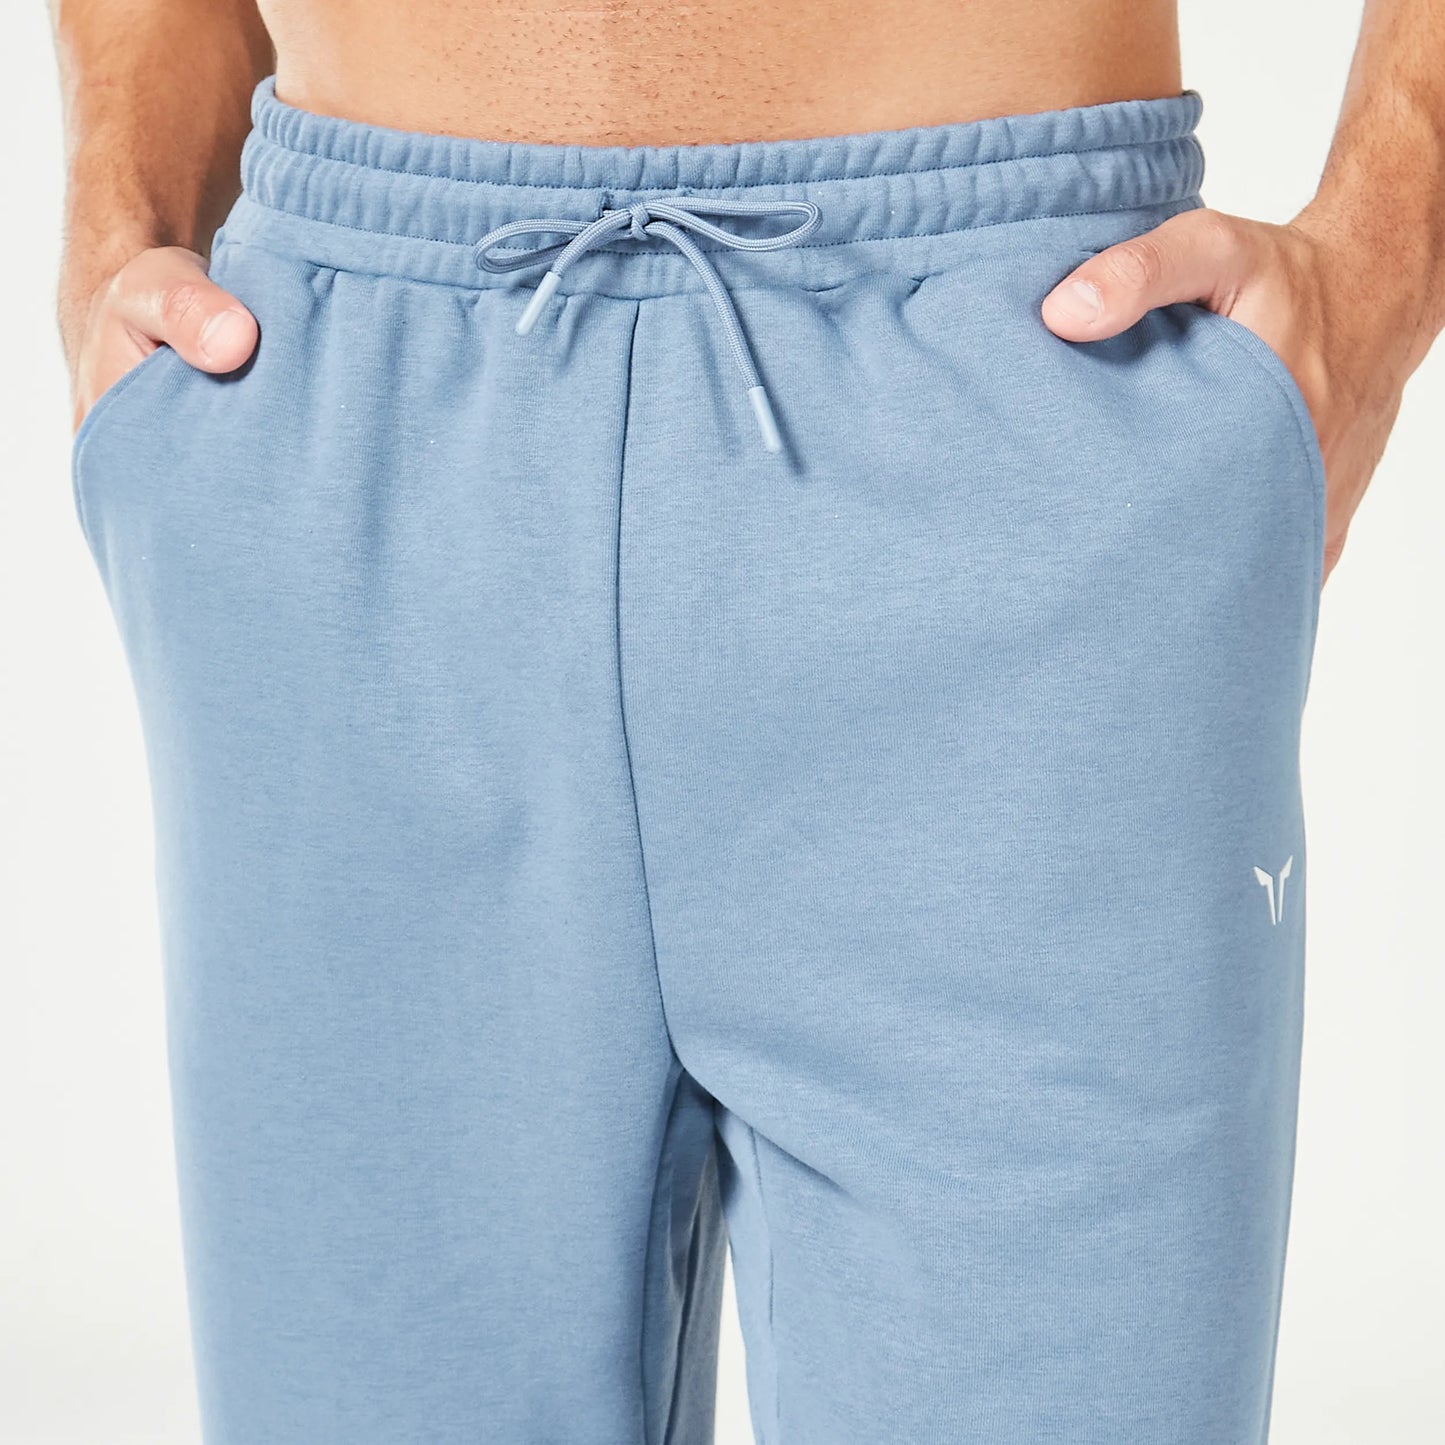 Essential Workout Joggers - Coronet Blue